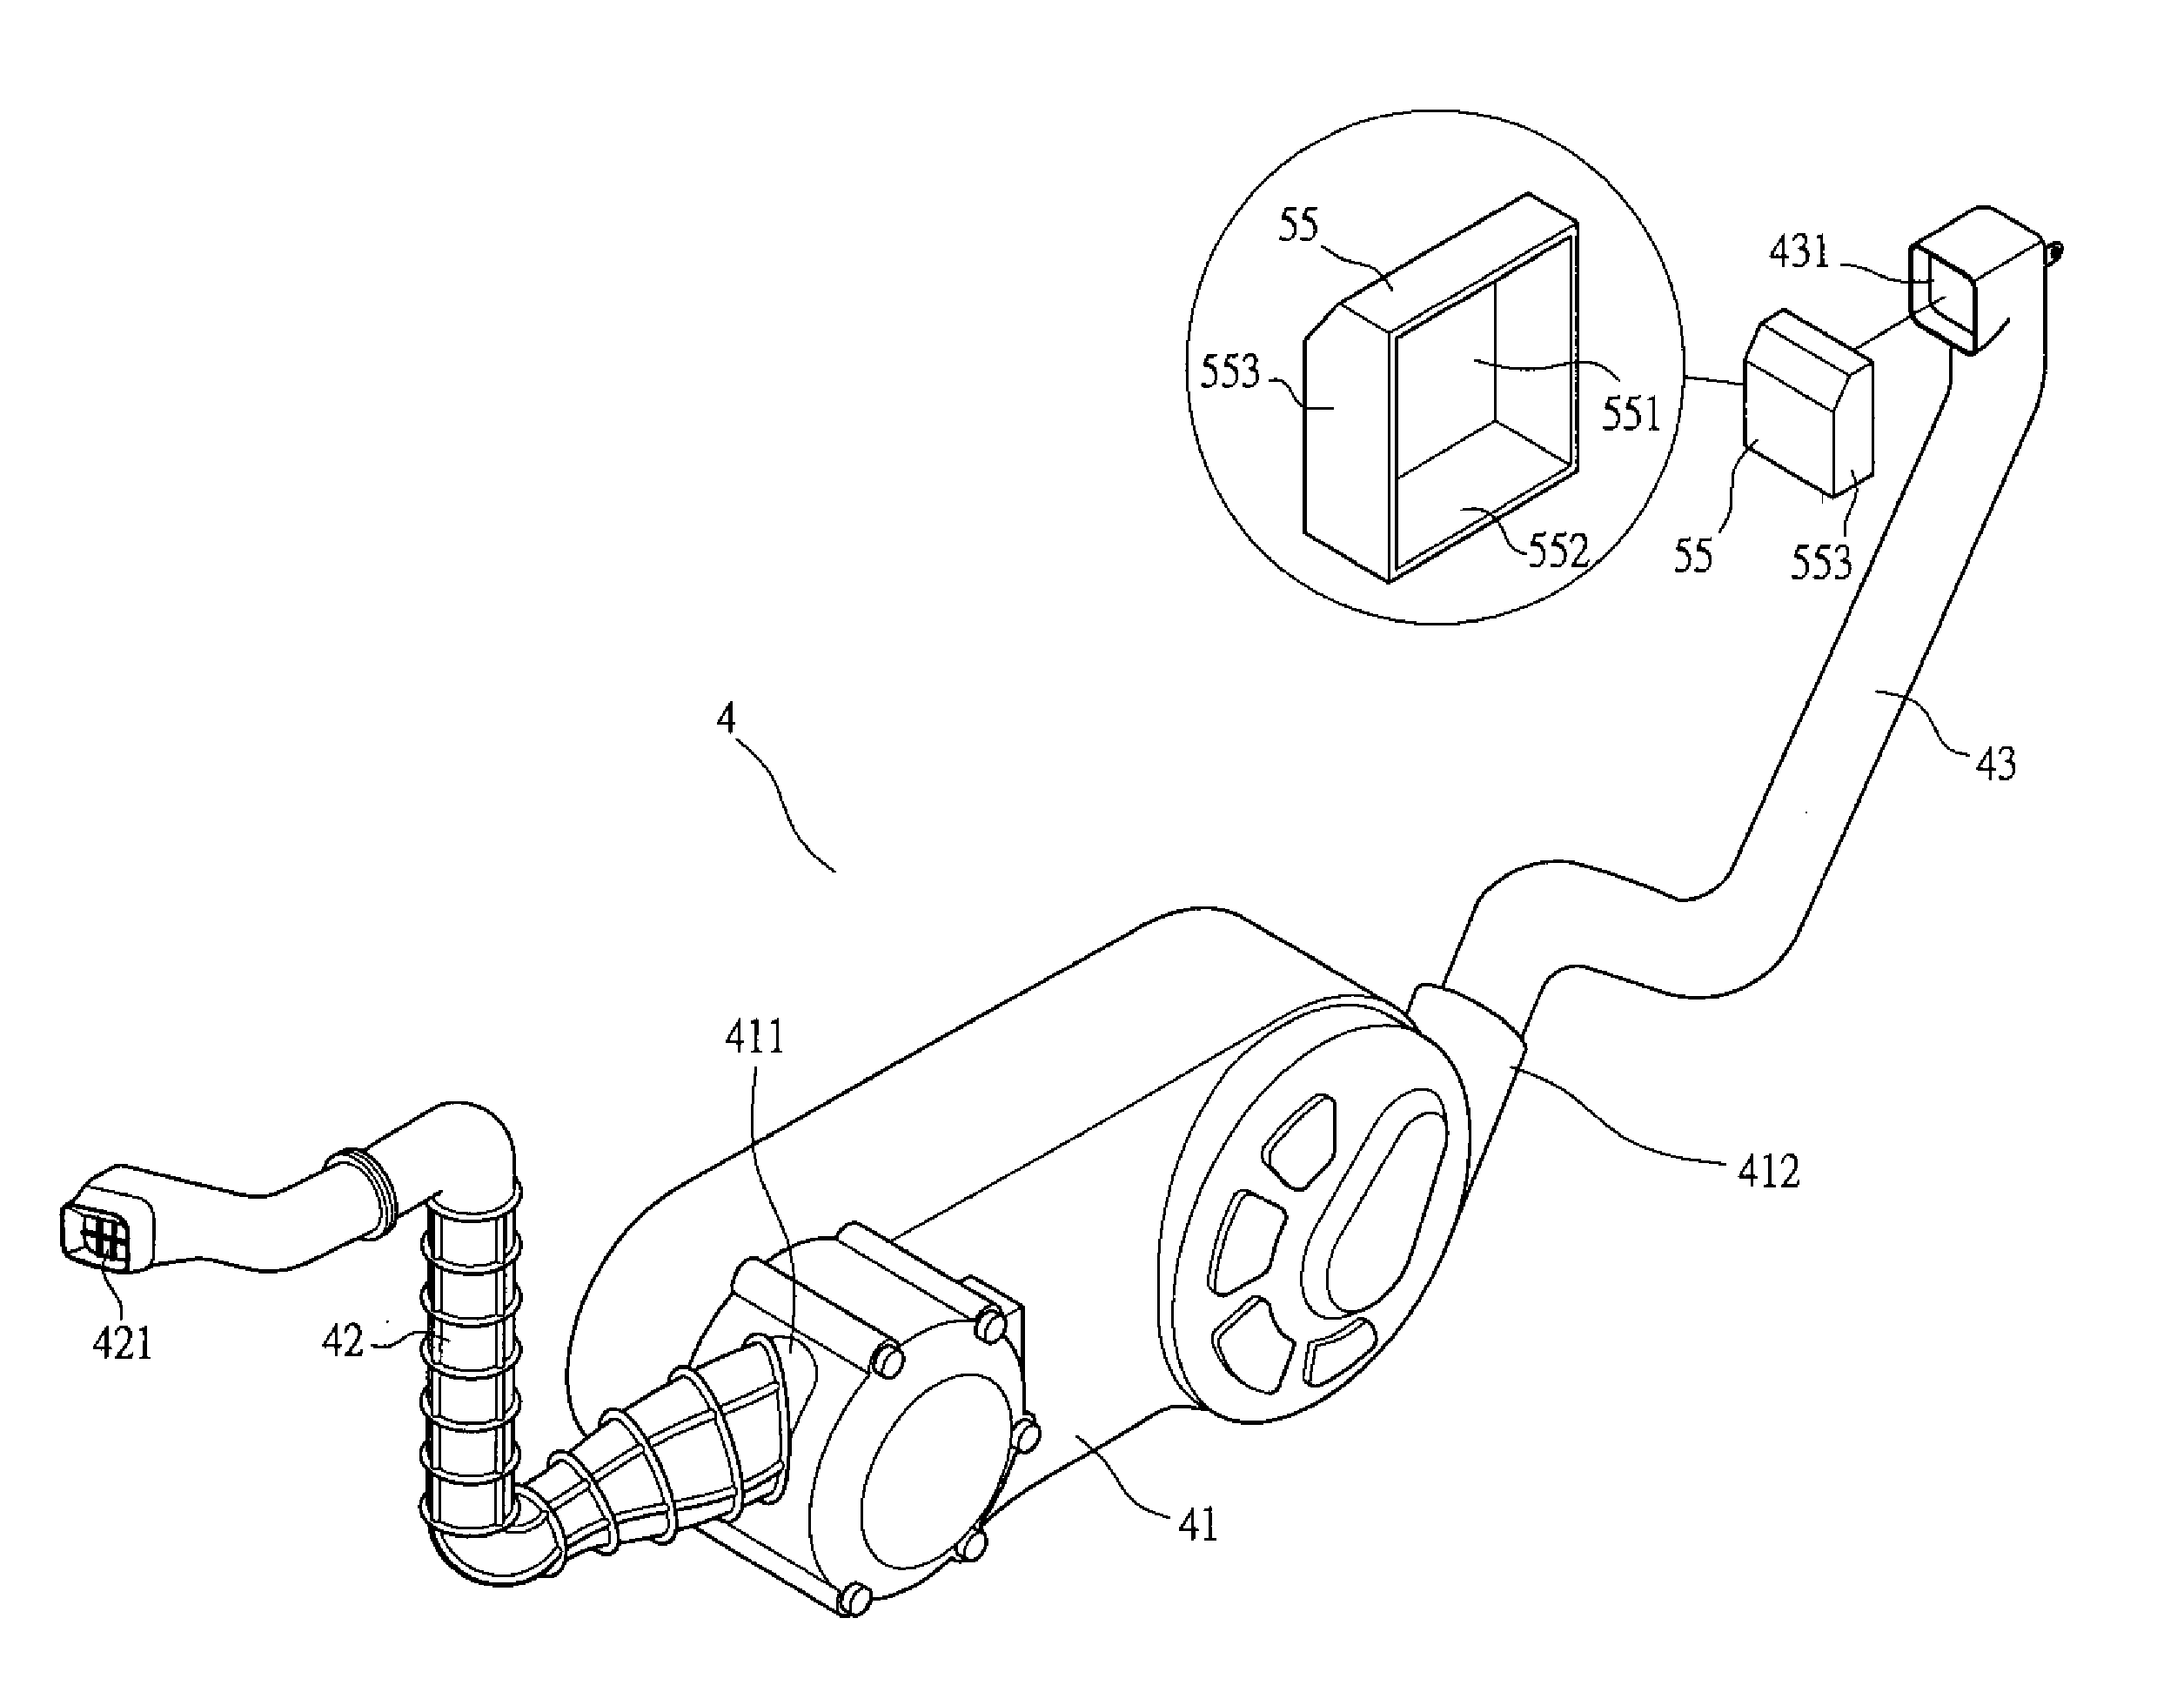 Cooling structure for a continuous variation transmission system of an all-terrain vehicle